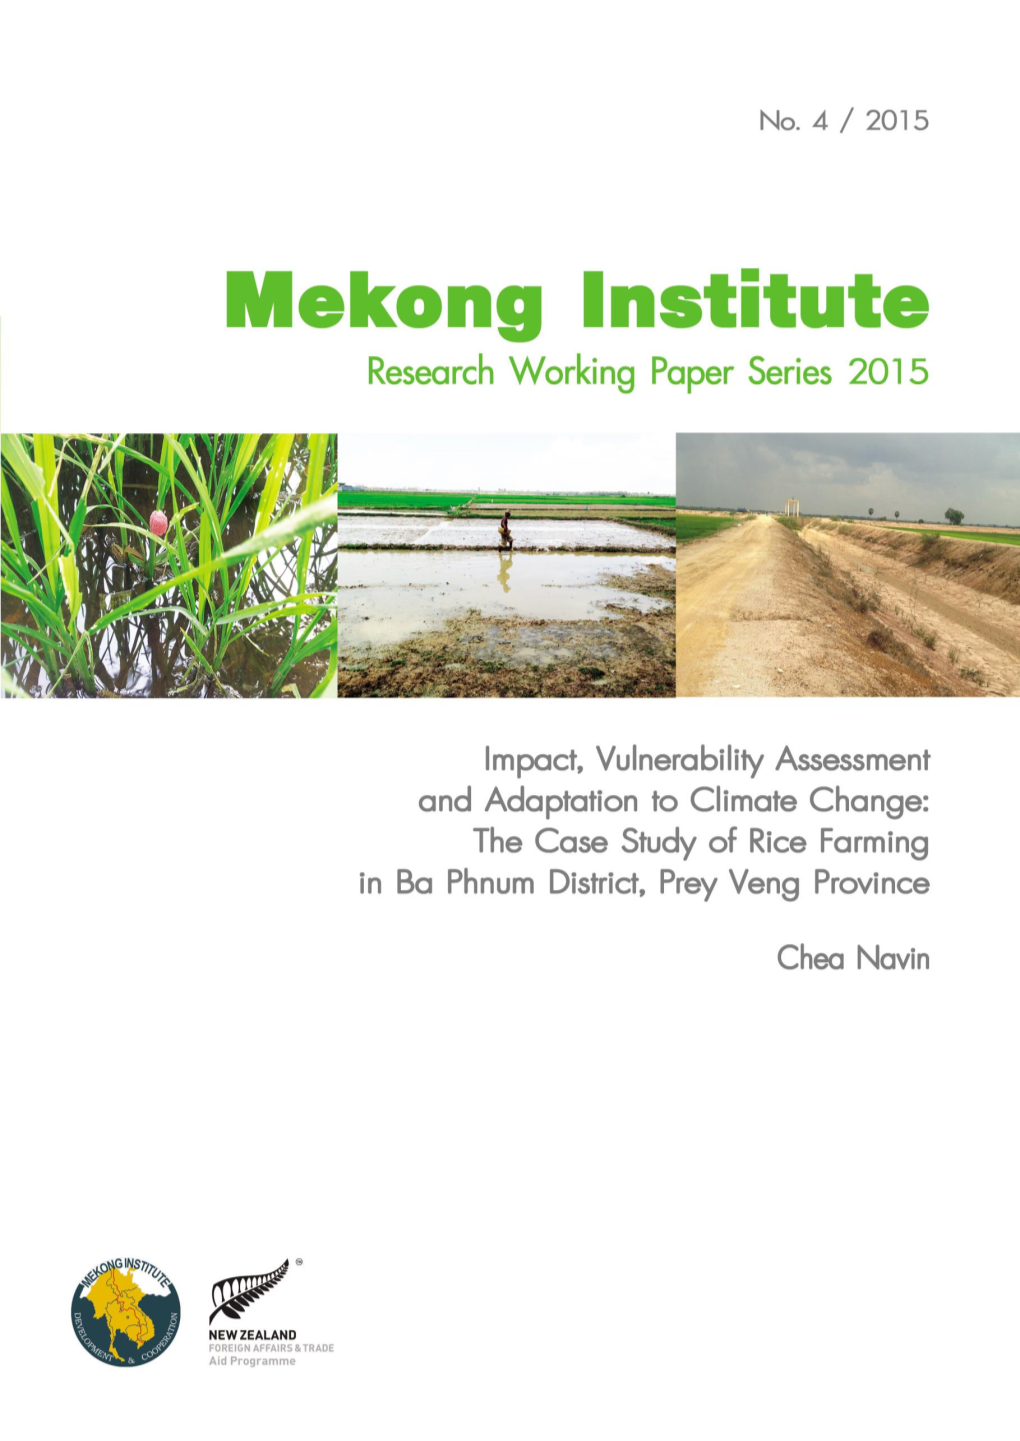 Impact, Vulnerability Assessment and Adaptation to Climate Change: the Case Study of Rice Farming in Ba Phnum District, Prey Veng Province